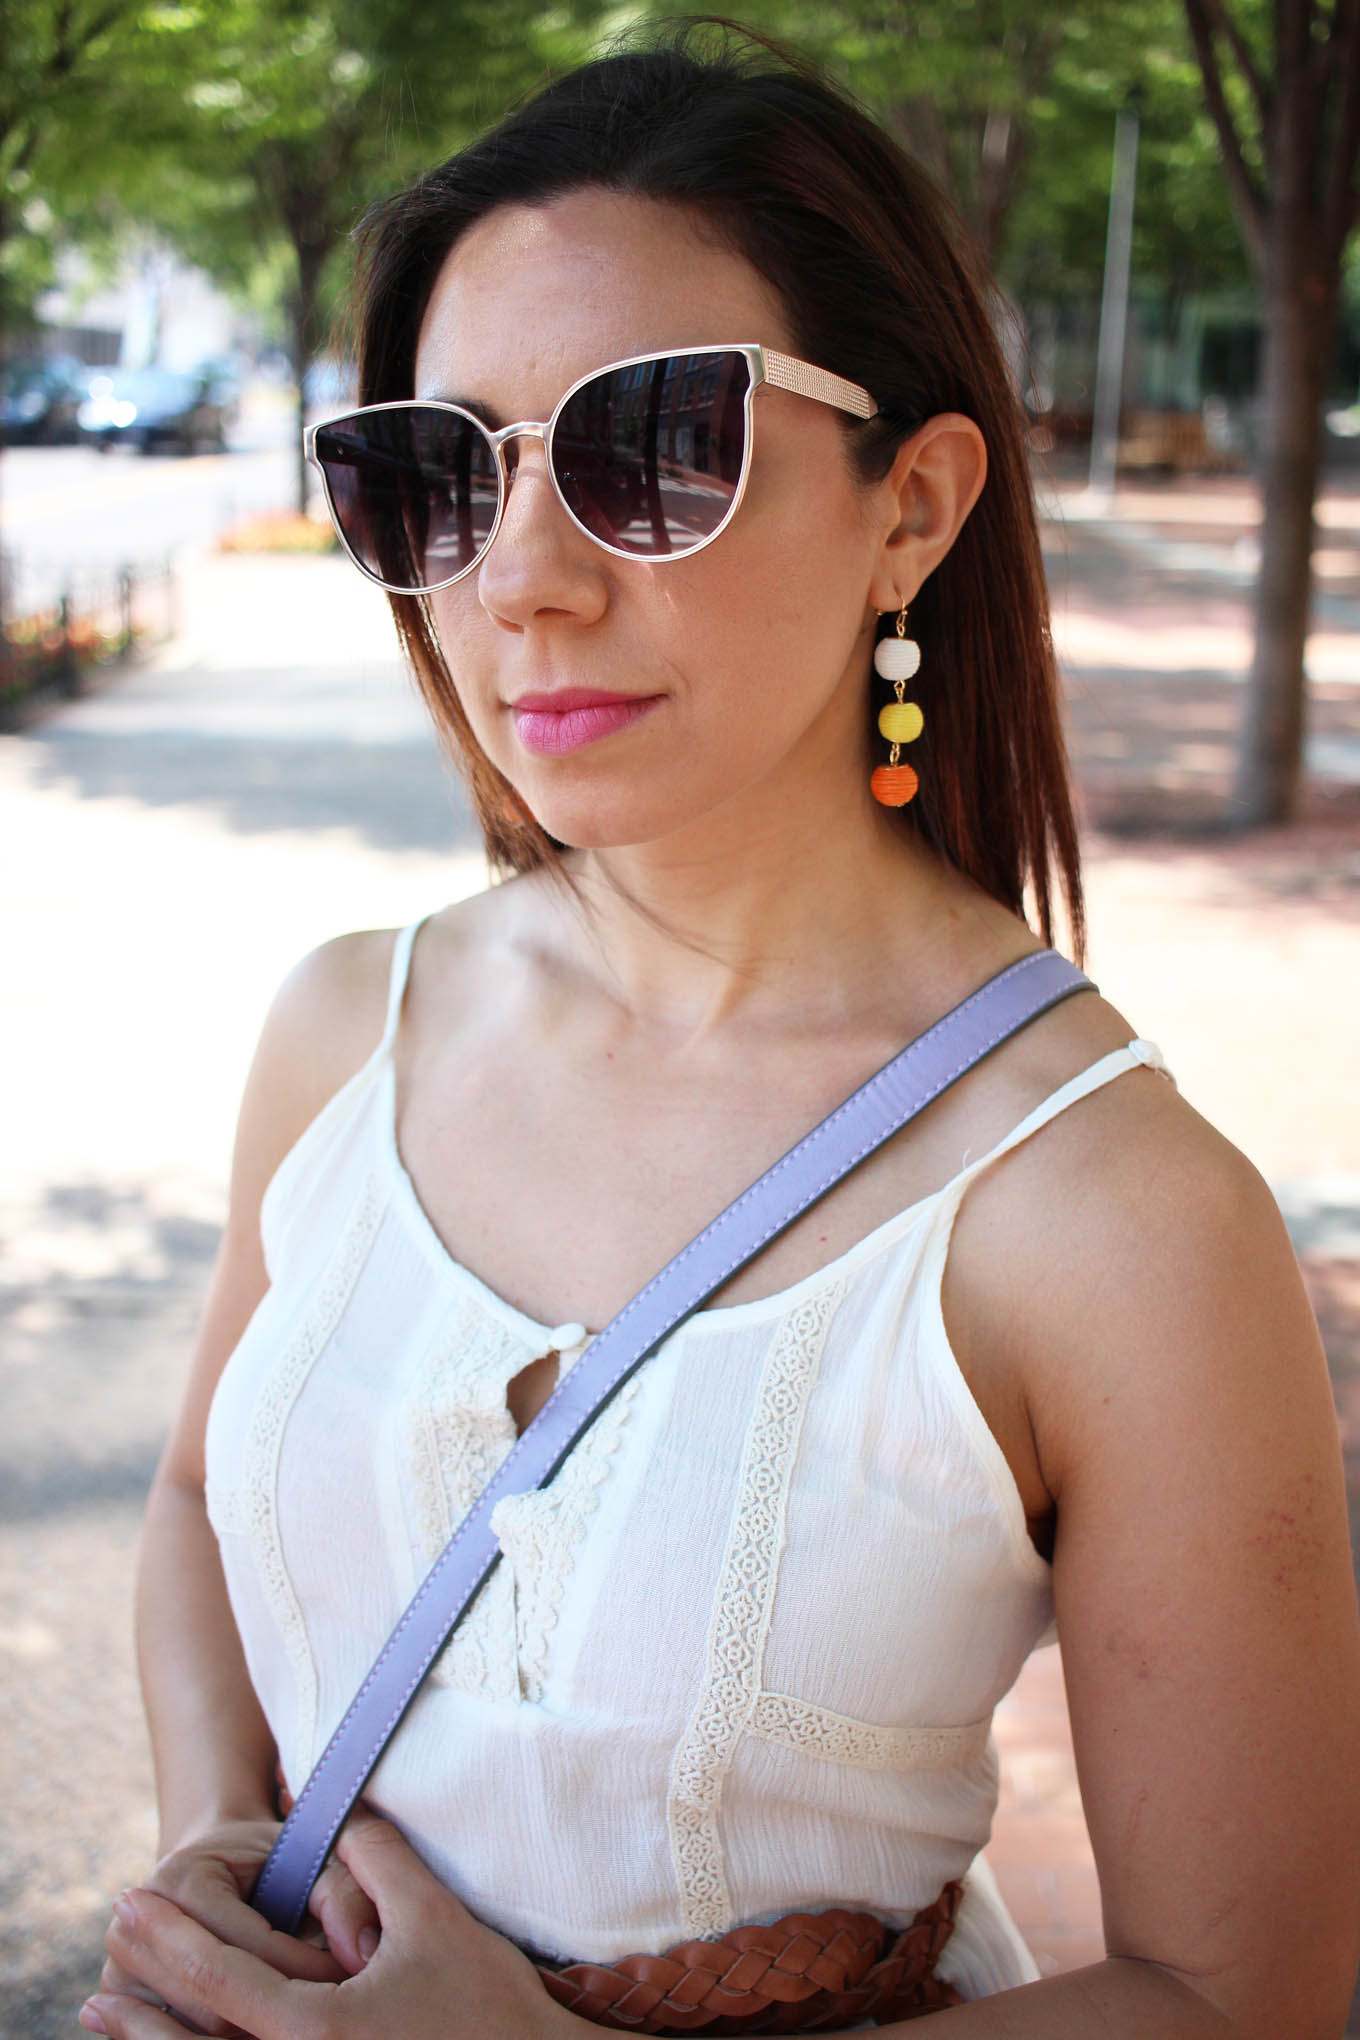 Lifestyle blogger Roxanne of Glass of Glam wearing a Jane.com outfit and a Gucci Marmont giveaway